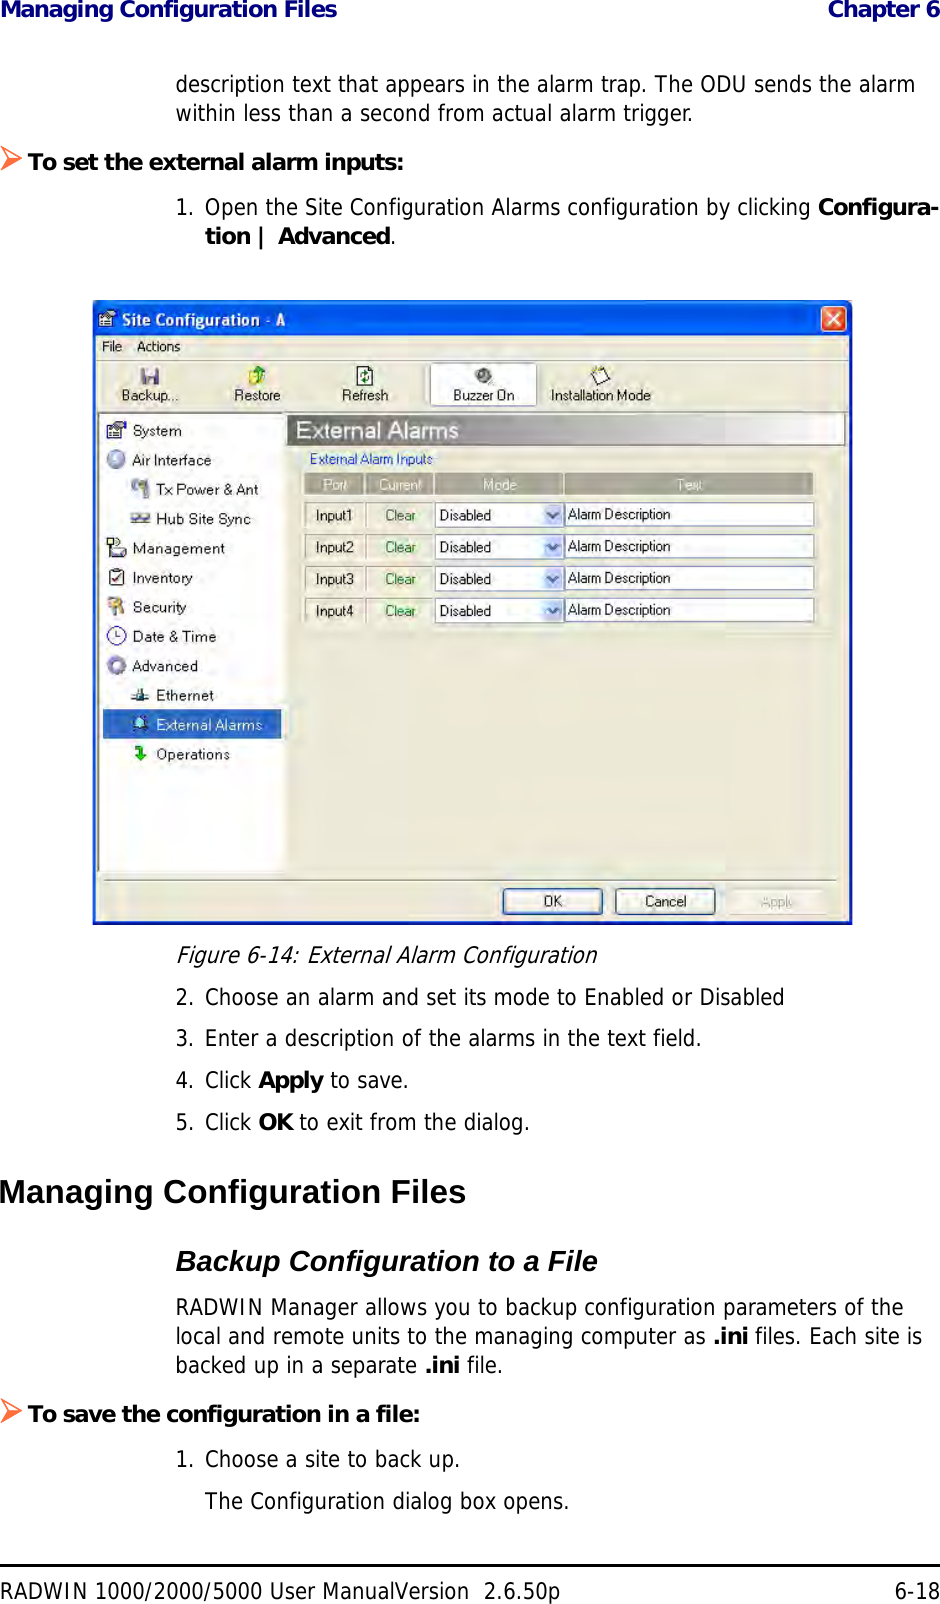 Managing Configuration Files  Chapter 6RADWIN 1000/2000/5000 User ManualVersion  2.6.50p 6-18description text that appears in the alarm trap. The ODU sends the alarm within less than a second from actual alarm trigger.To set the external alarm inputs:1. Open the Site Configuration Alarms configuration by clicking Configura-tion | Advanced.Figure 6-14: External Alarm Configuration2. Choose an alarm and set its mode to Enabled or Disabled3. Enter a description of the alarms in the text field.4. Click Apply to save.5. Click OK to exit from the dialog.Managing Configuration FilesBackup Configuration to a FileRADWIN Manager allows you to backup configuration parameters of the local and remote units to the managing computer as .ini files. Each site is backed up in a separate .ini file.To save the configuration in a file:1. Choose a site to back up.The Configuration dialog box opens.